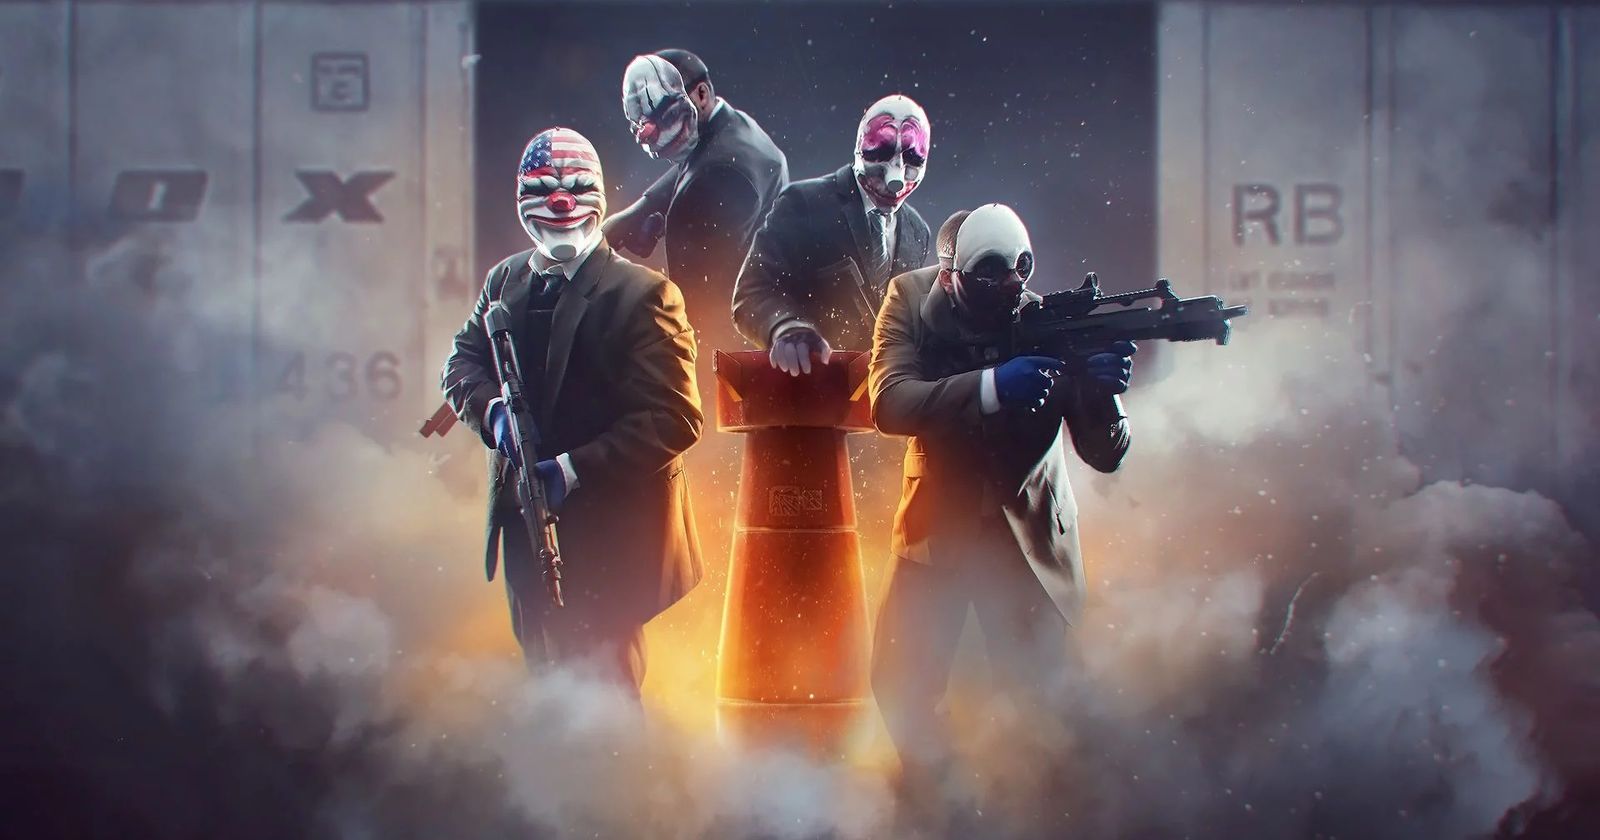 Will PAYDAY 3 support crossplay and cross-progression?